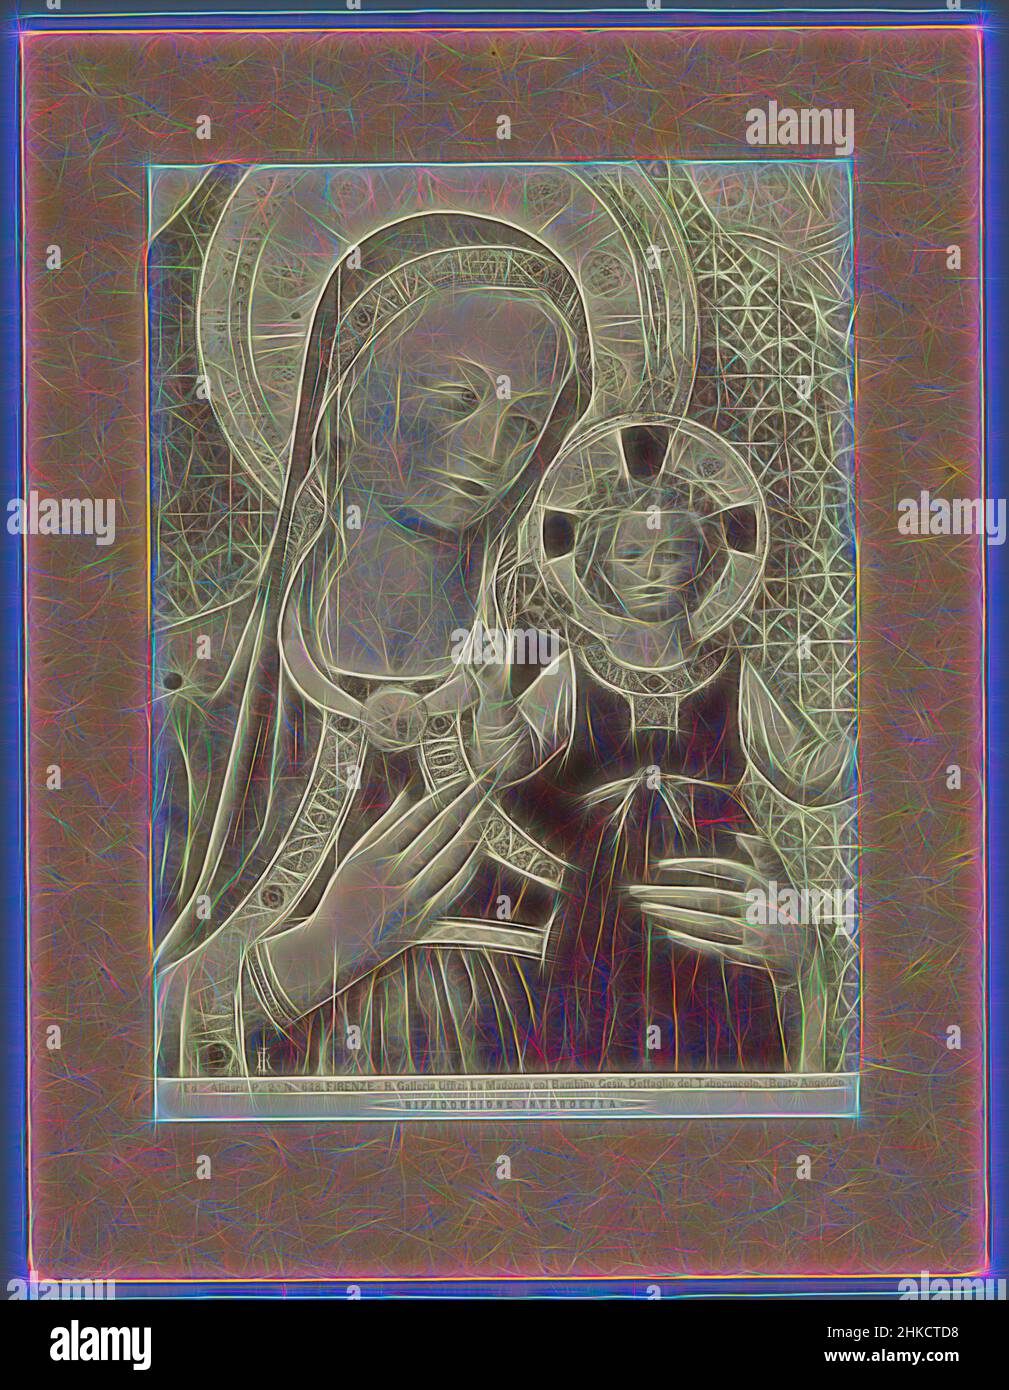 Inspired by  by Fra Angelico, depicting Mary with Child, FIRENZE - R. Galleria Uffizi. La Madonna col Bambino Gesù. Dettaglio del Tabernacolo., Alinari, Fra Angelico, Galleria degli Uffizi, Italy, c. 1875 - c. 1900, albumen print, height 253 mm × width 185 mm, Reimagined by Artotop. Classic art reinvented with a modern twist. Design of warm cheerful glowing of brightness and light ray radiance. Photography inspired by surrealism and futurism, embracing dynamic energy of modern technology, movement, speed and revolutionize culture Stock Photo